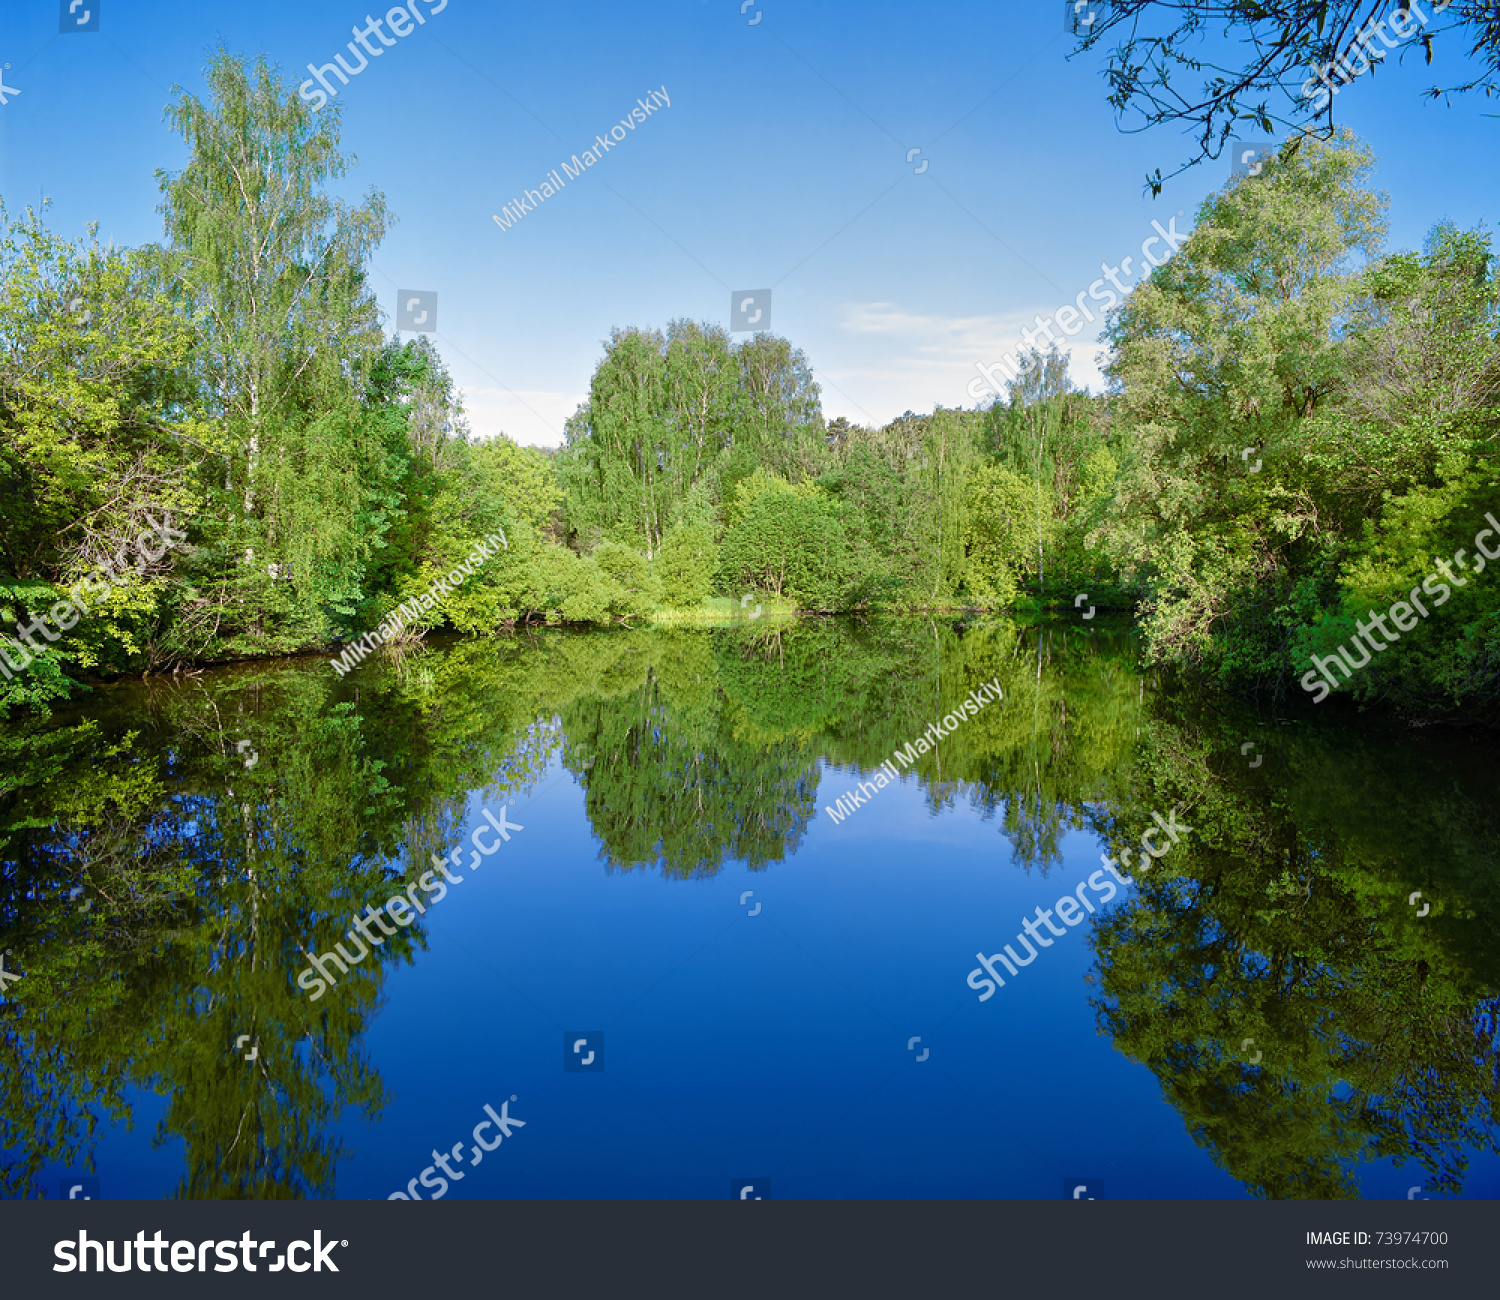 Landscape with trees, reflecting in the water #73974700